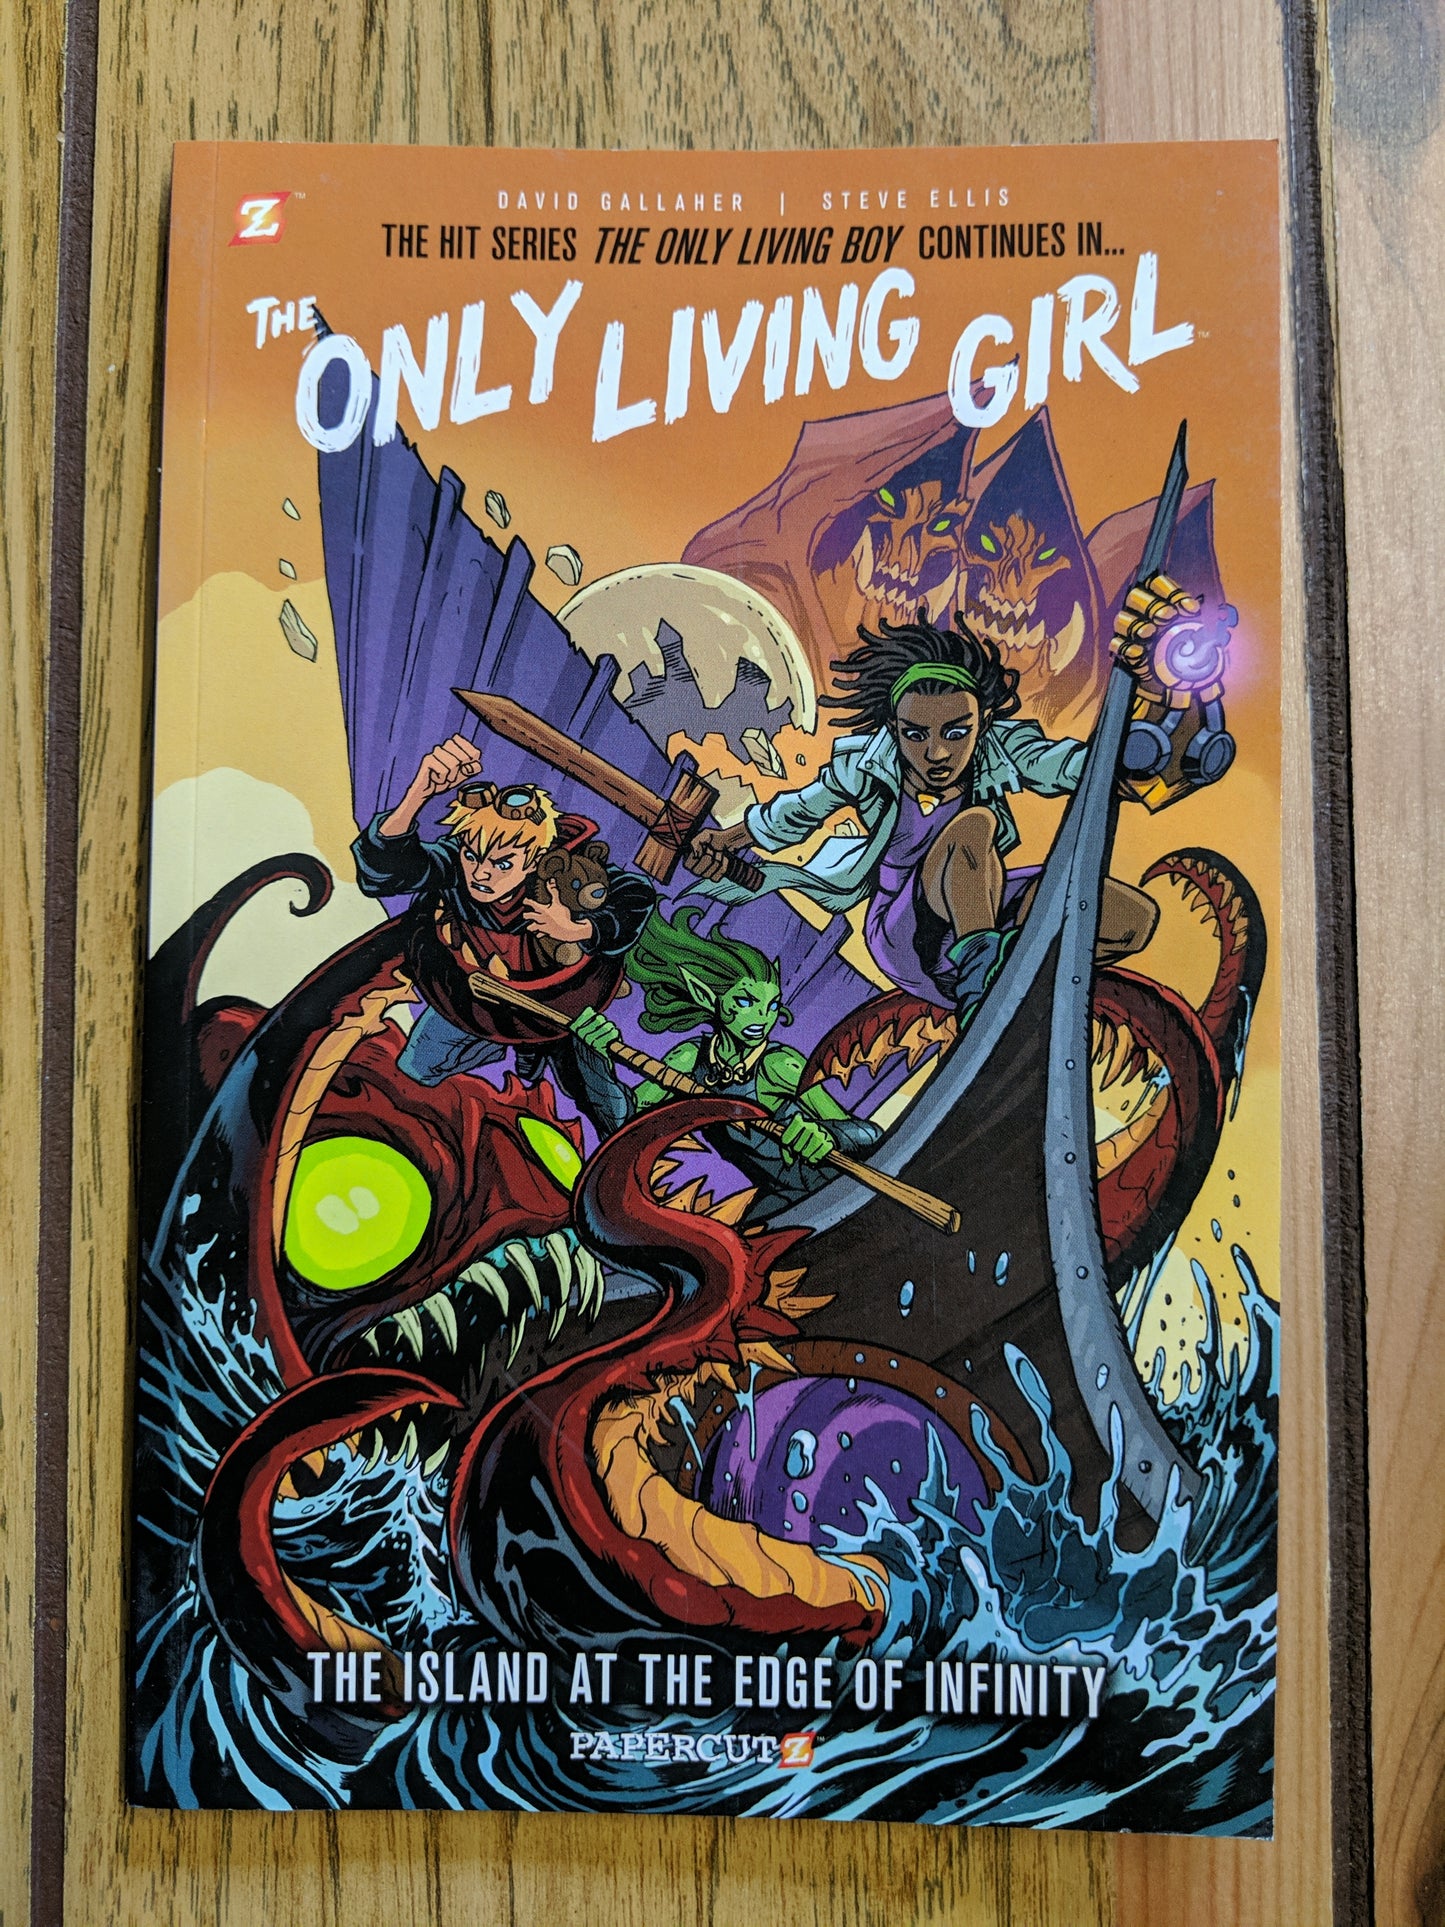 The Only Living Girl: The Island at the Edge of Infinity (#1)